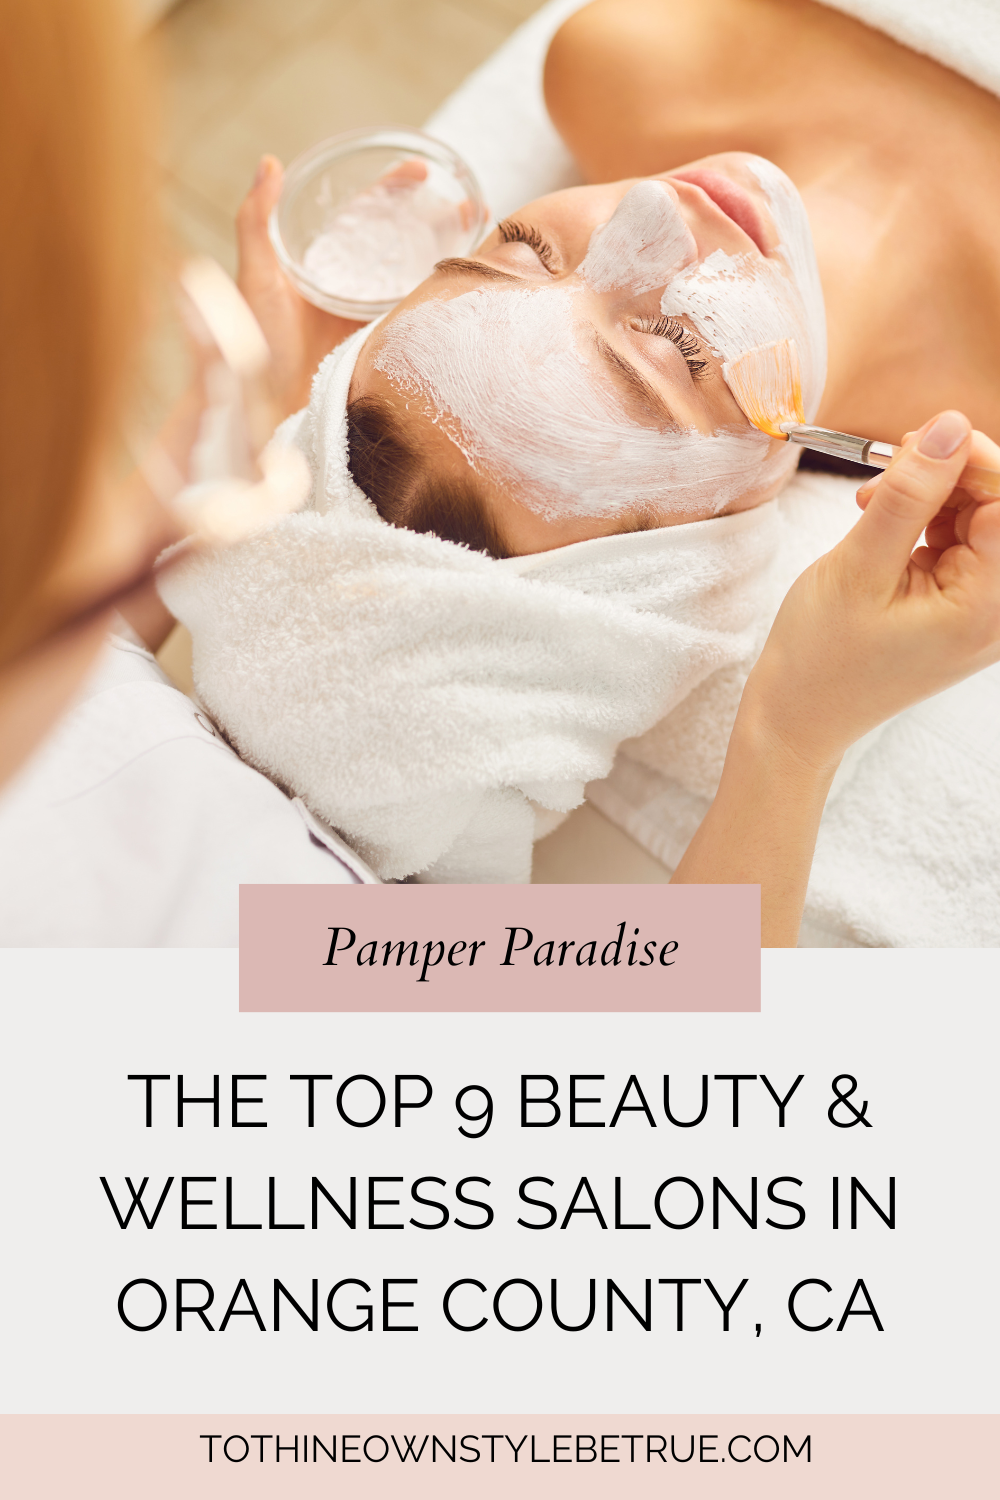 Pamper Paradise: The Top 9 Beauty & Wellness Salons in Orange County, CA